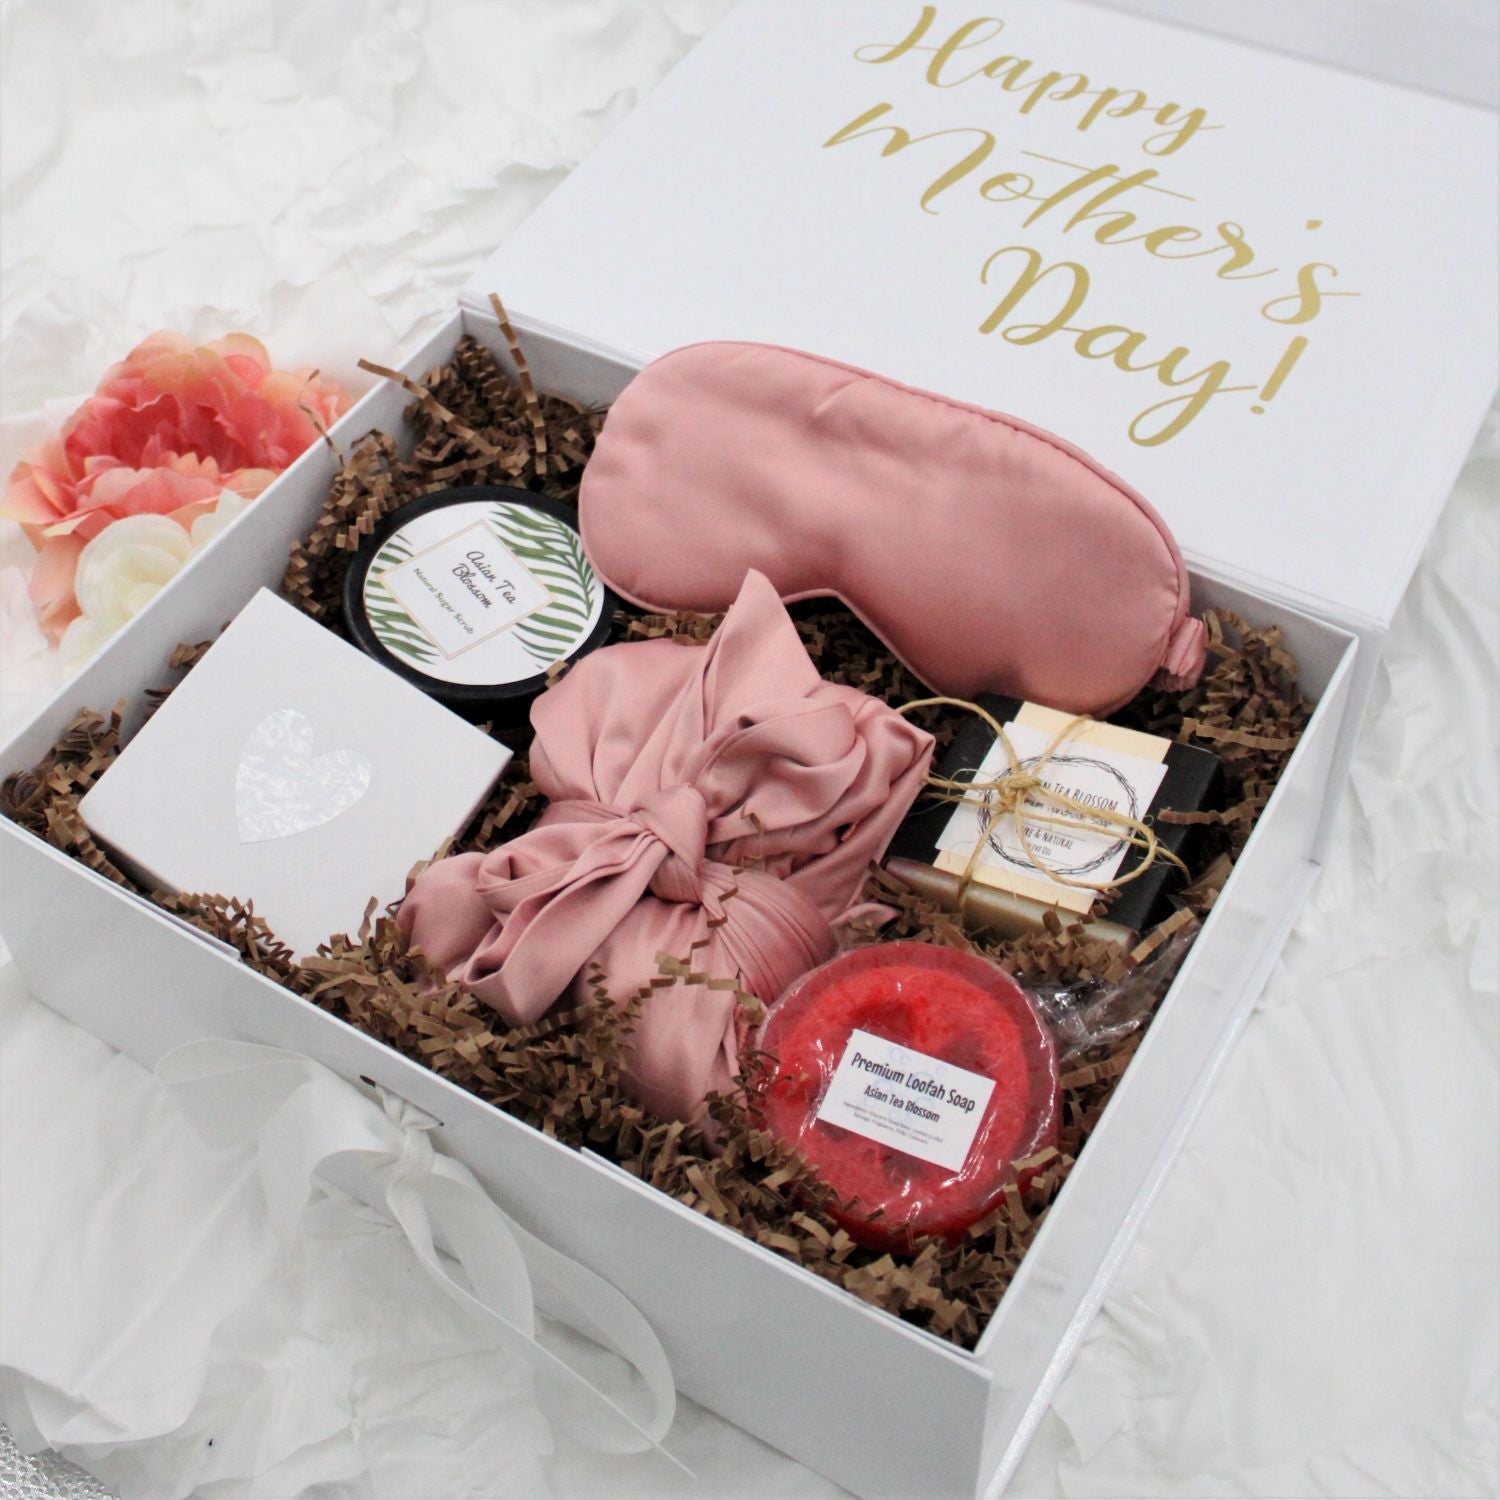 14 personalized gifts to give Mom this Mother's Day